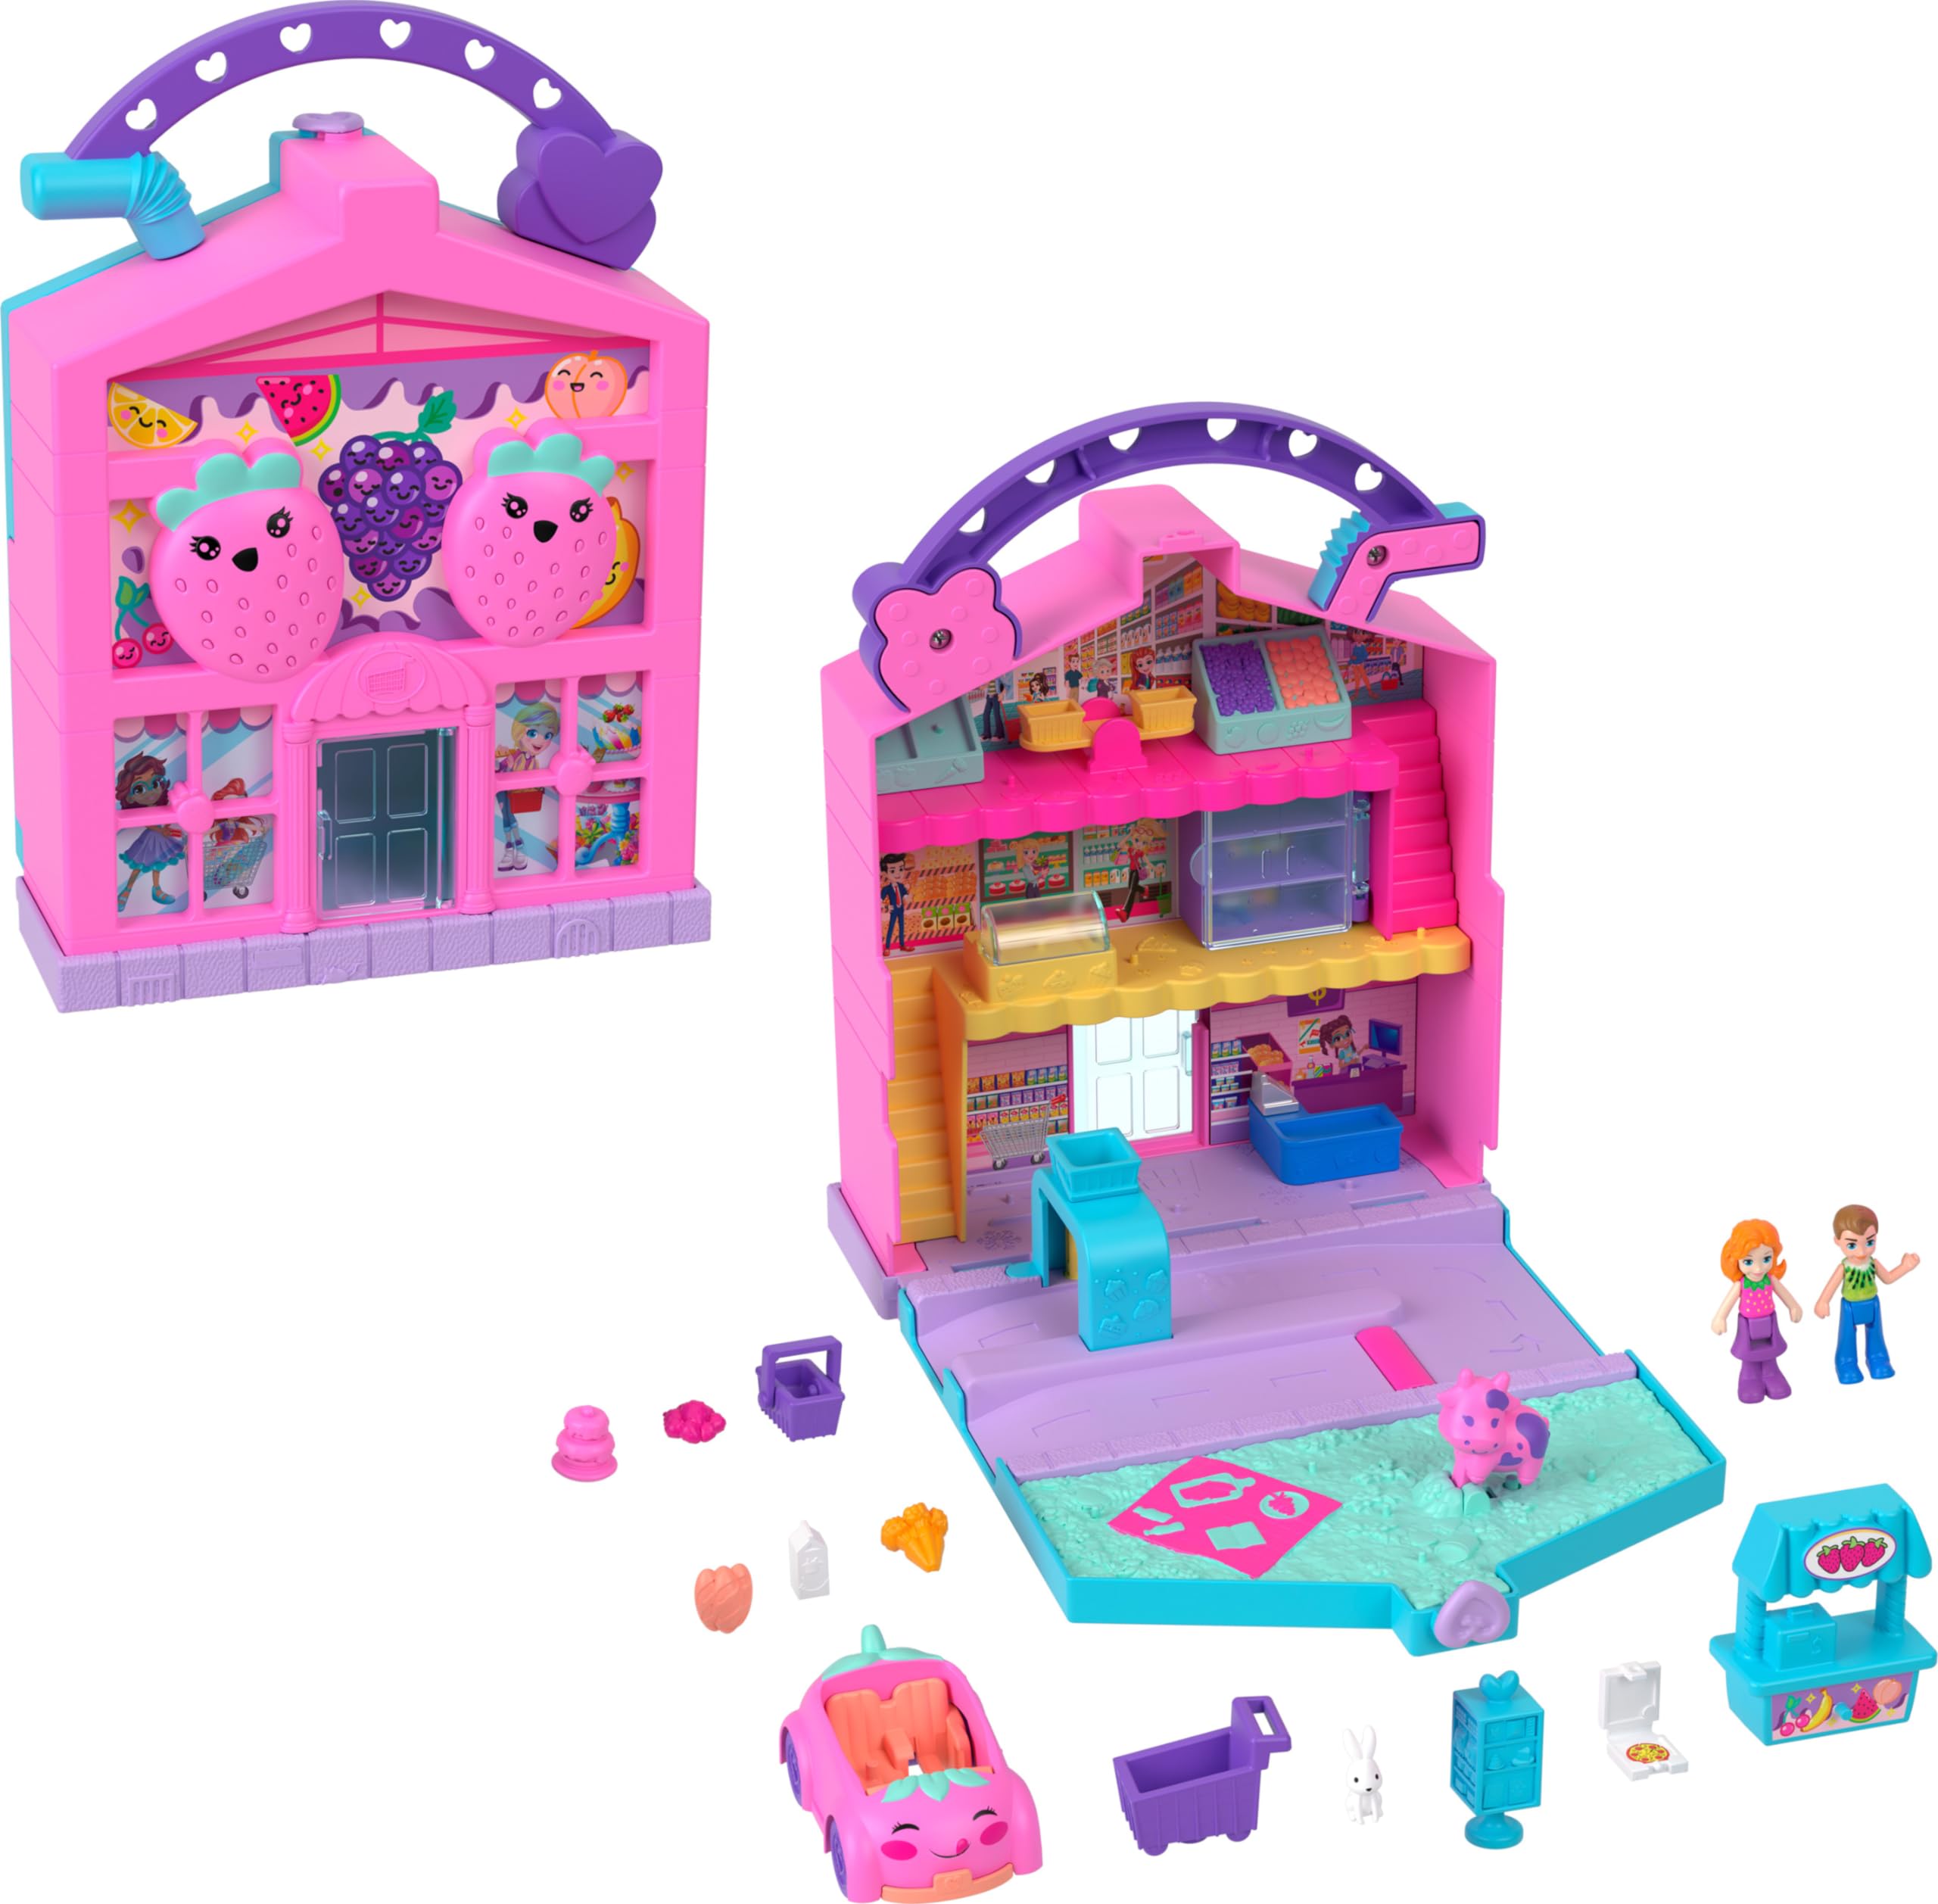 Polly Pocket Dolls & Playset, Food Toy with 2 Micro Dolls, 12 Accessories with Toy Car and Pet, Pollyville Fresh Market